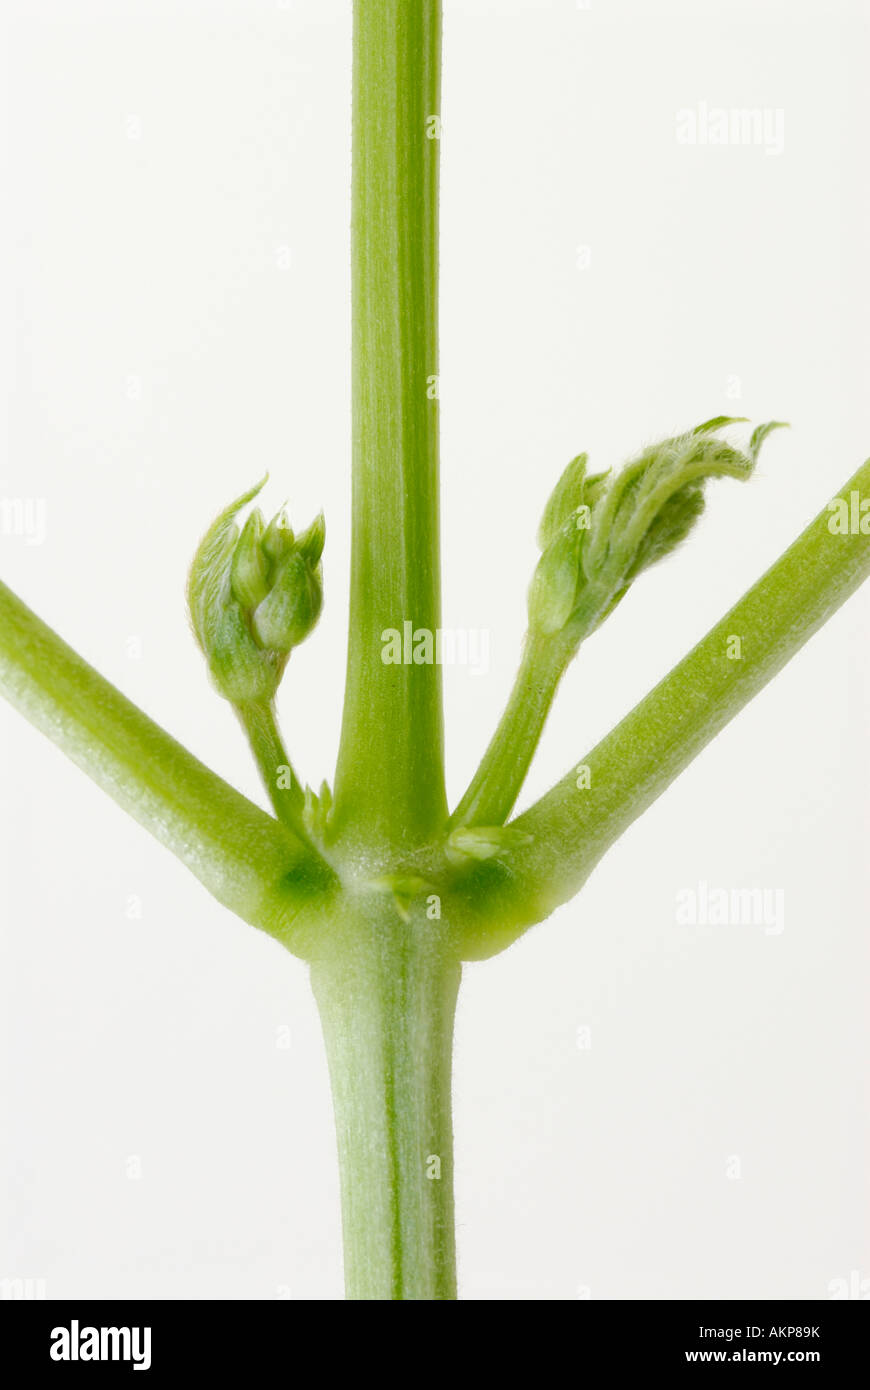 Lateral or axillary buds and stems in a plant Stock Photo